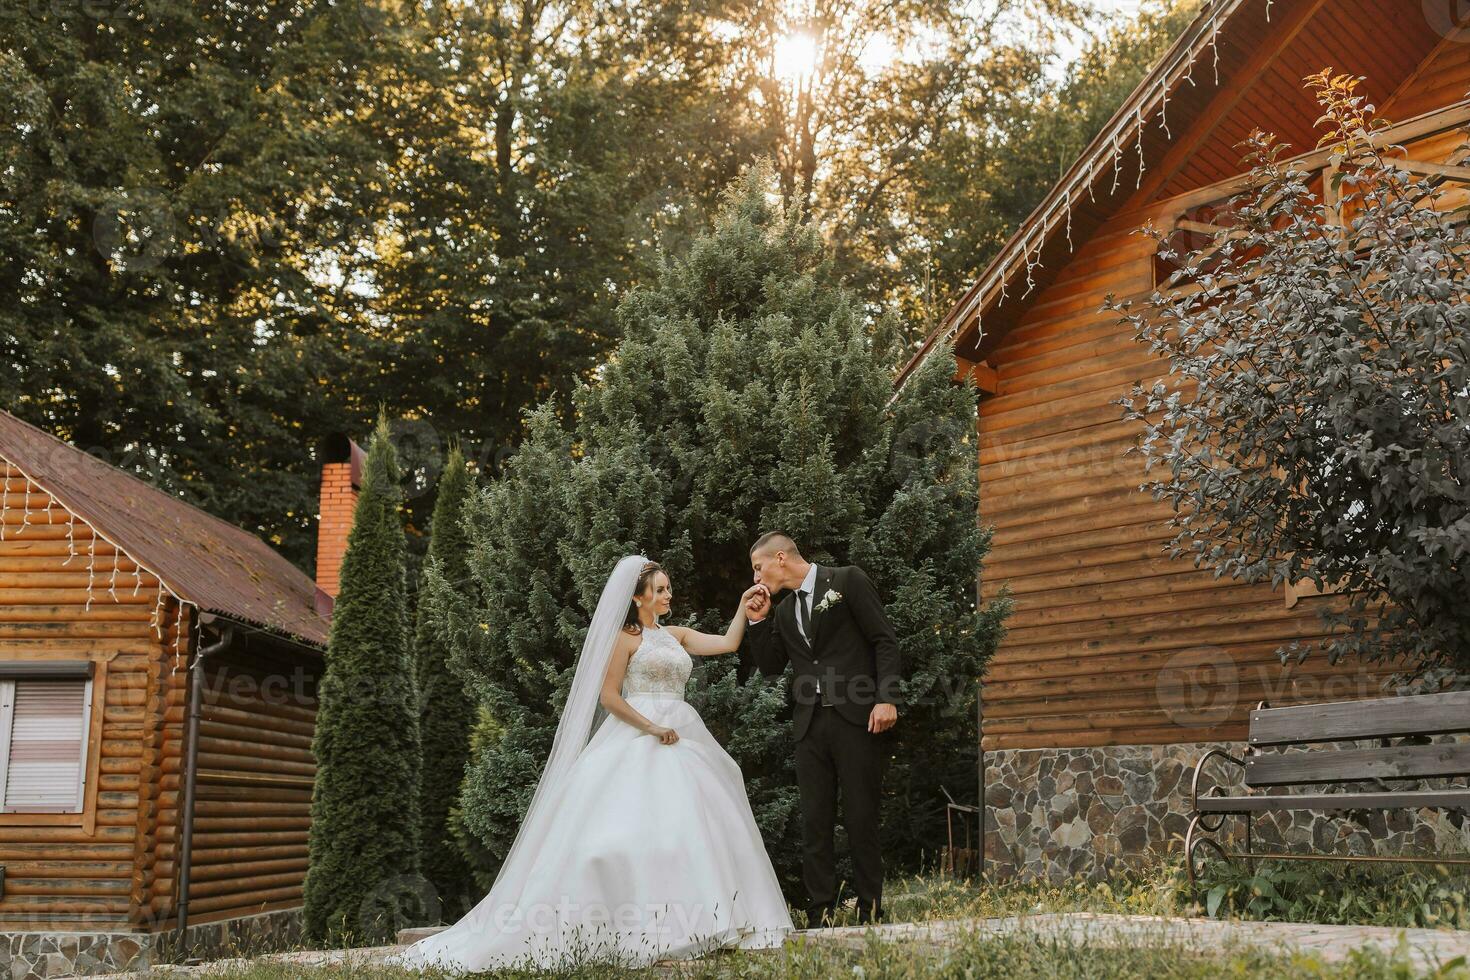 A stylish groom in a black suit and a cute bride in a white dress with a long veil are hugging and walking near green tall trees. Wedding portrait of smiling and happy newlyweds. photo